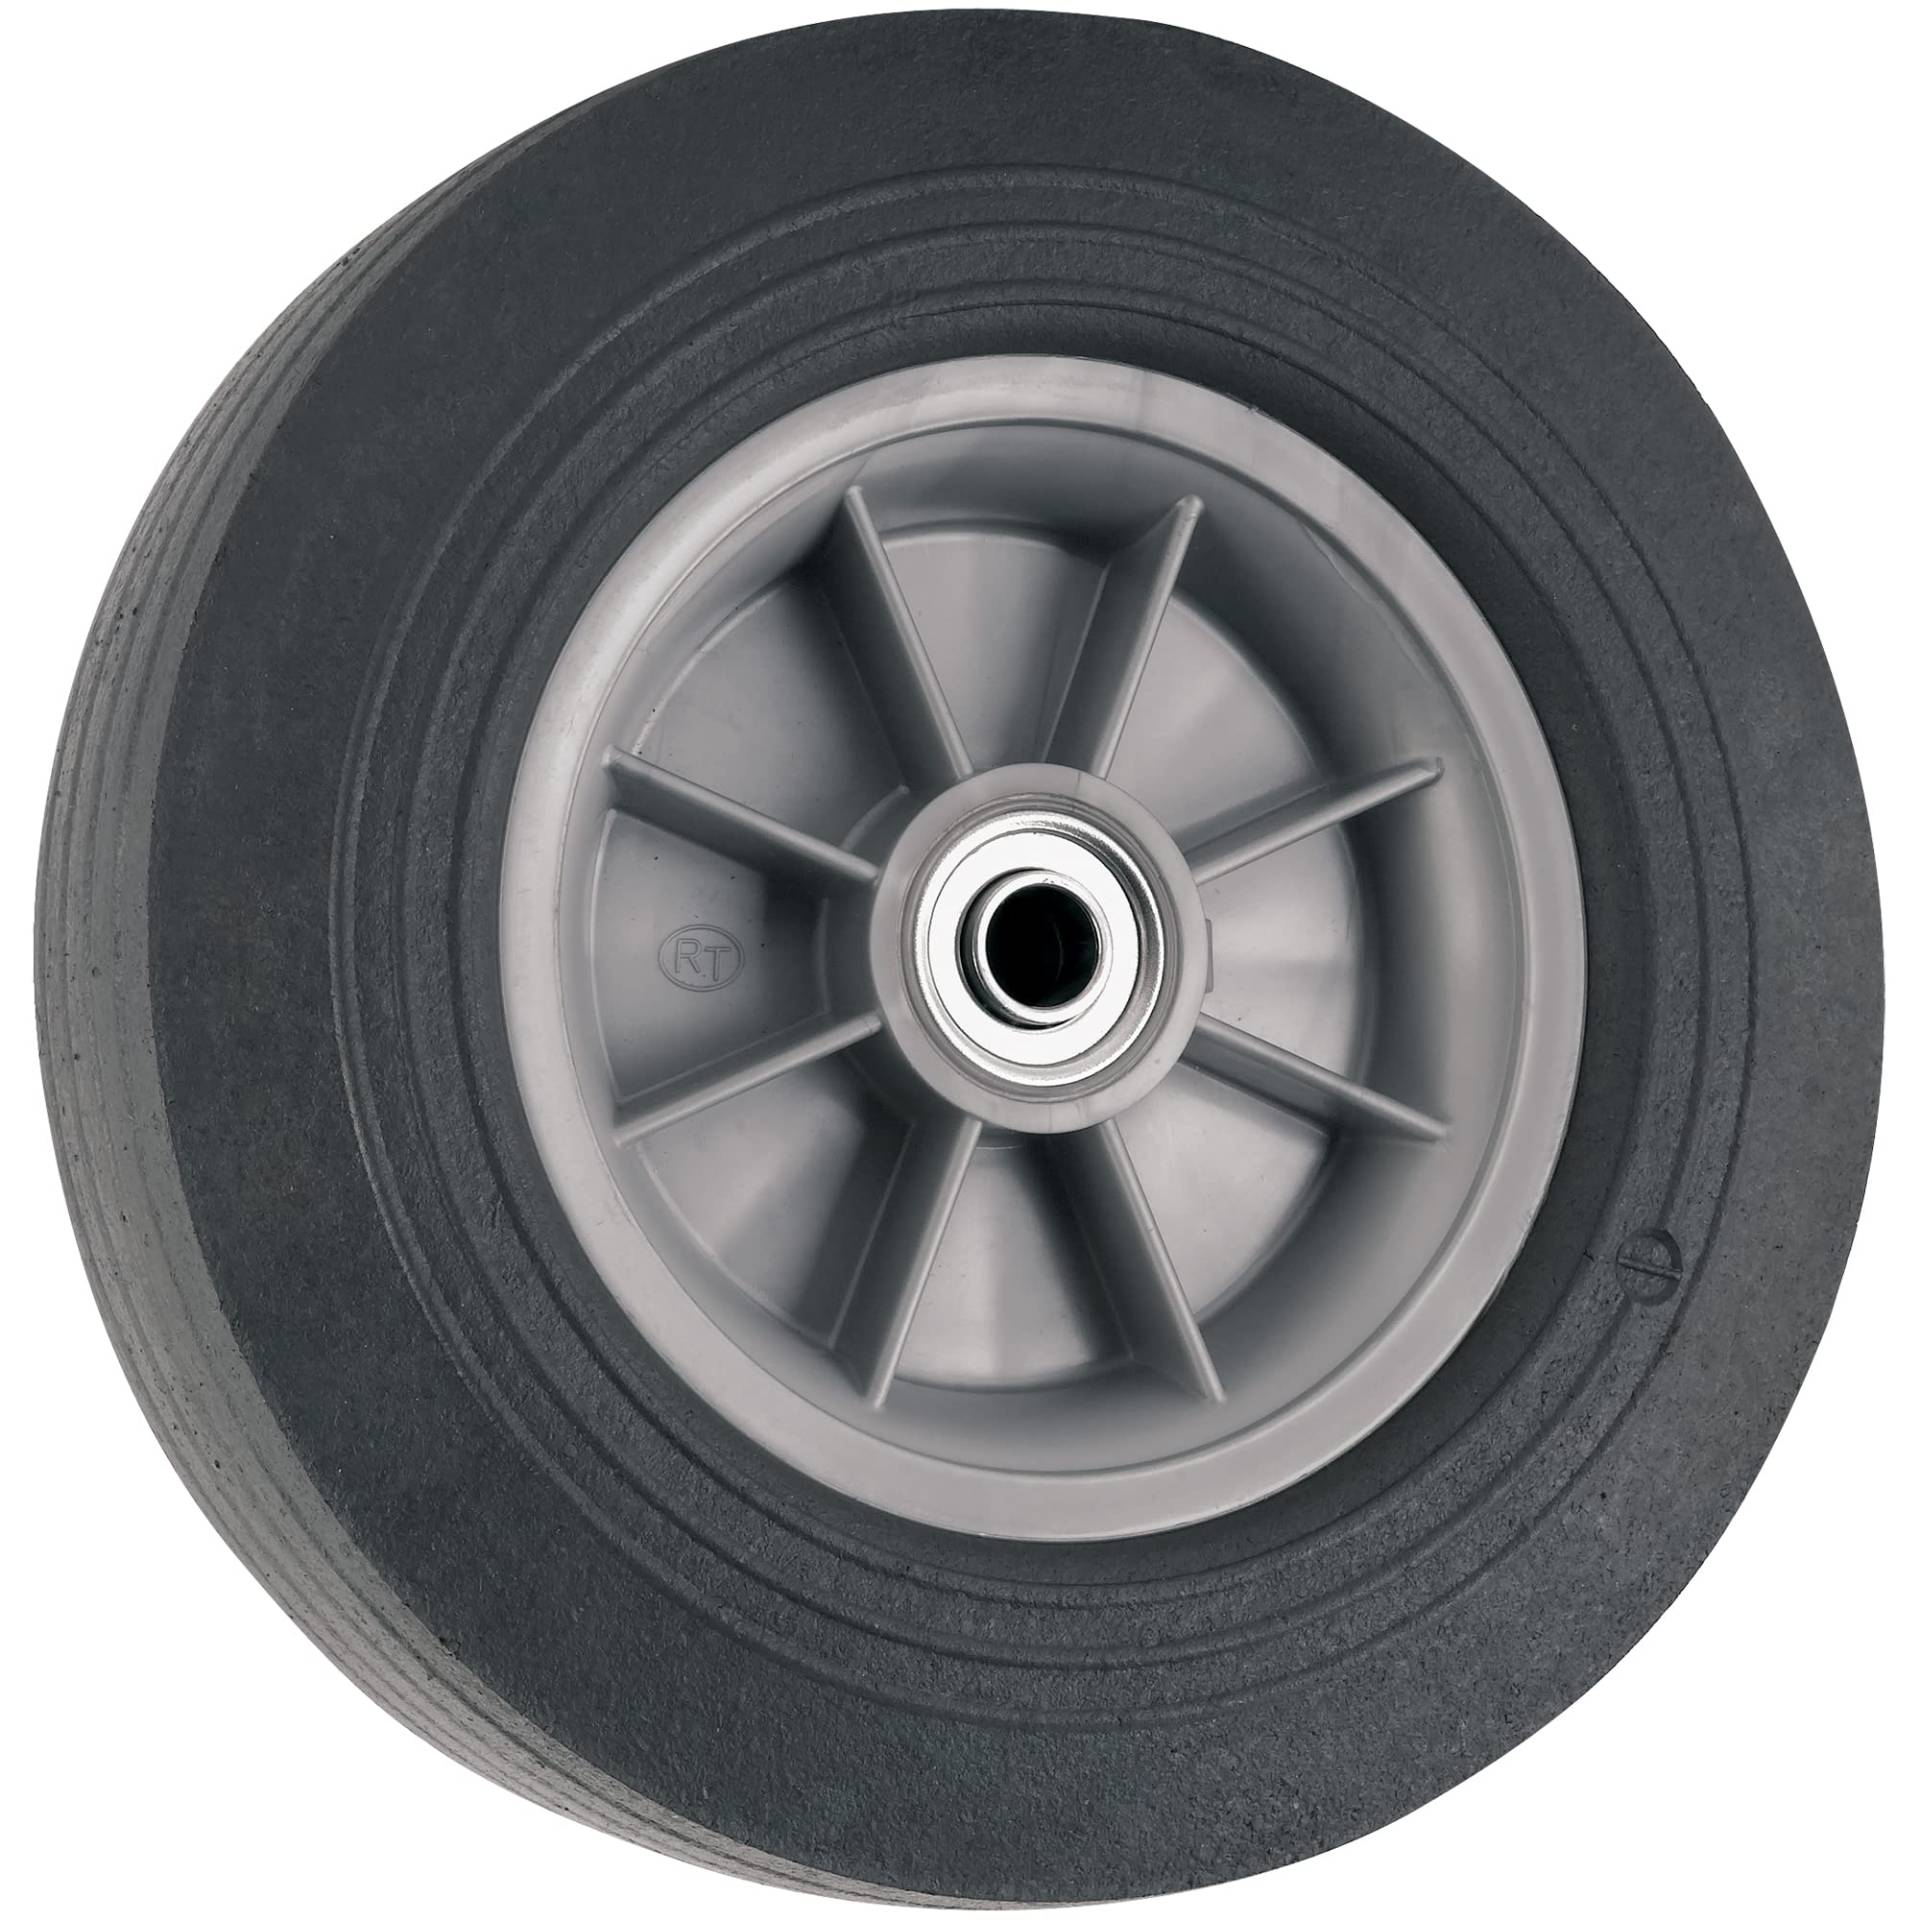 Flat Proof Replacement Wheel - 10-Inch - 300 lb. Load Capacity - for use on Wheelbarrows, Wagons, Carts, & Many Other Products von TITAN